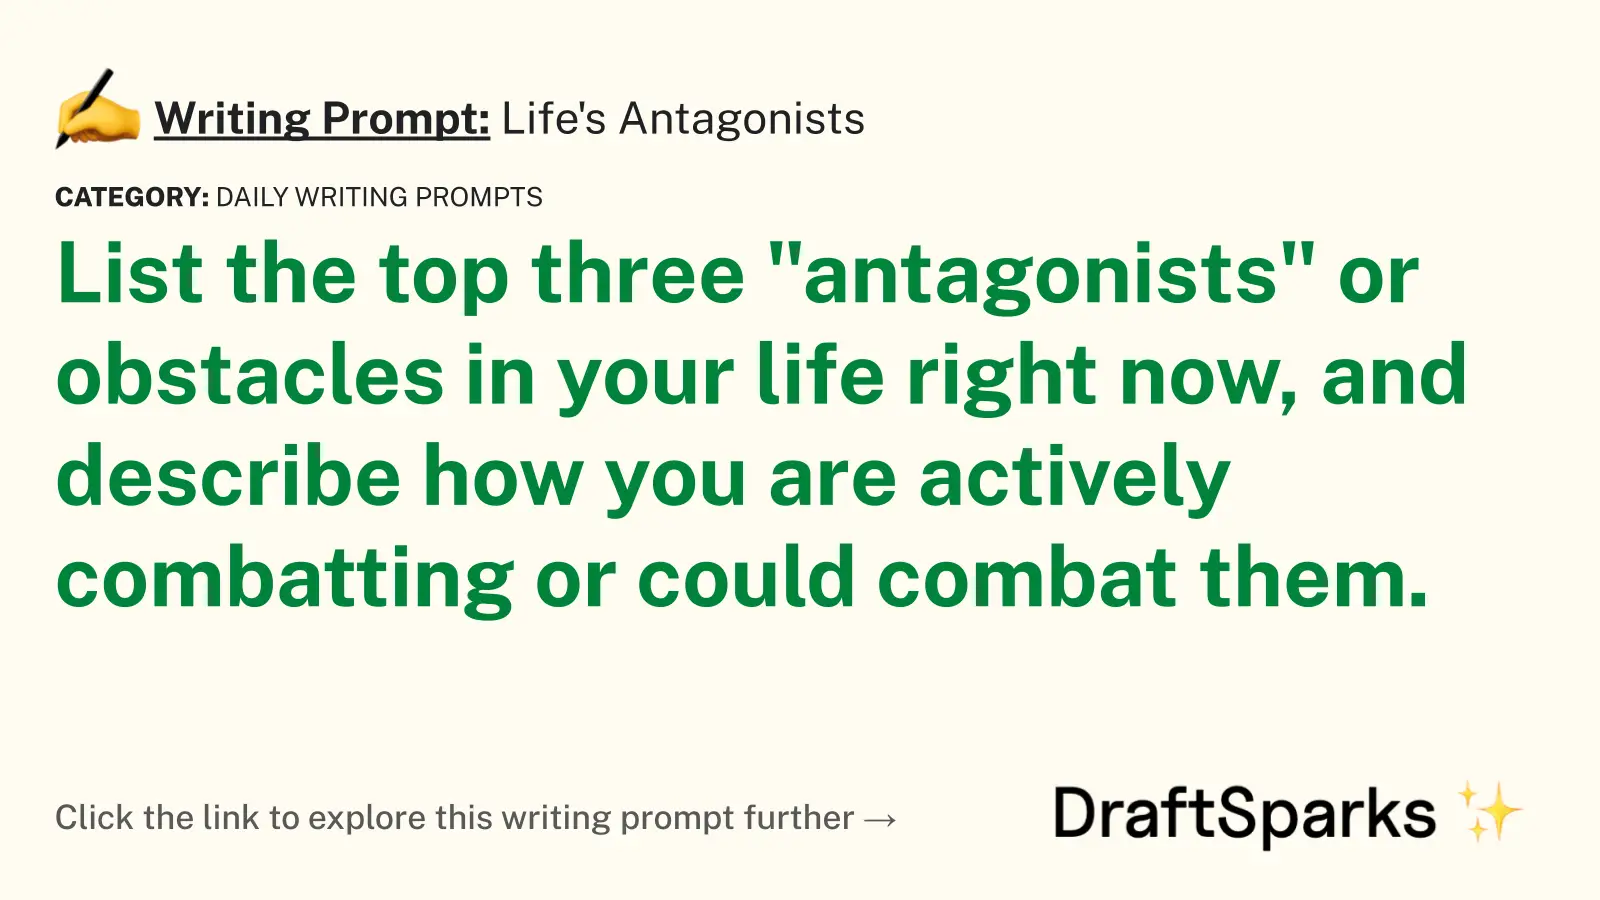 Life’s Antagonists